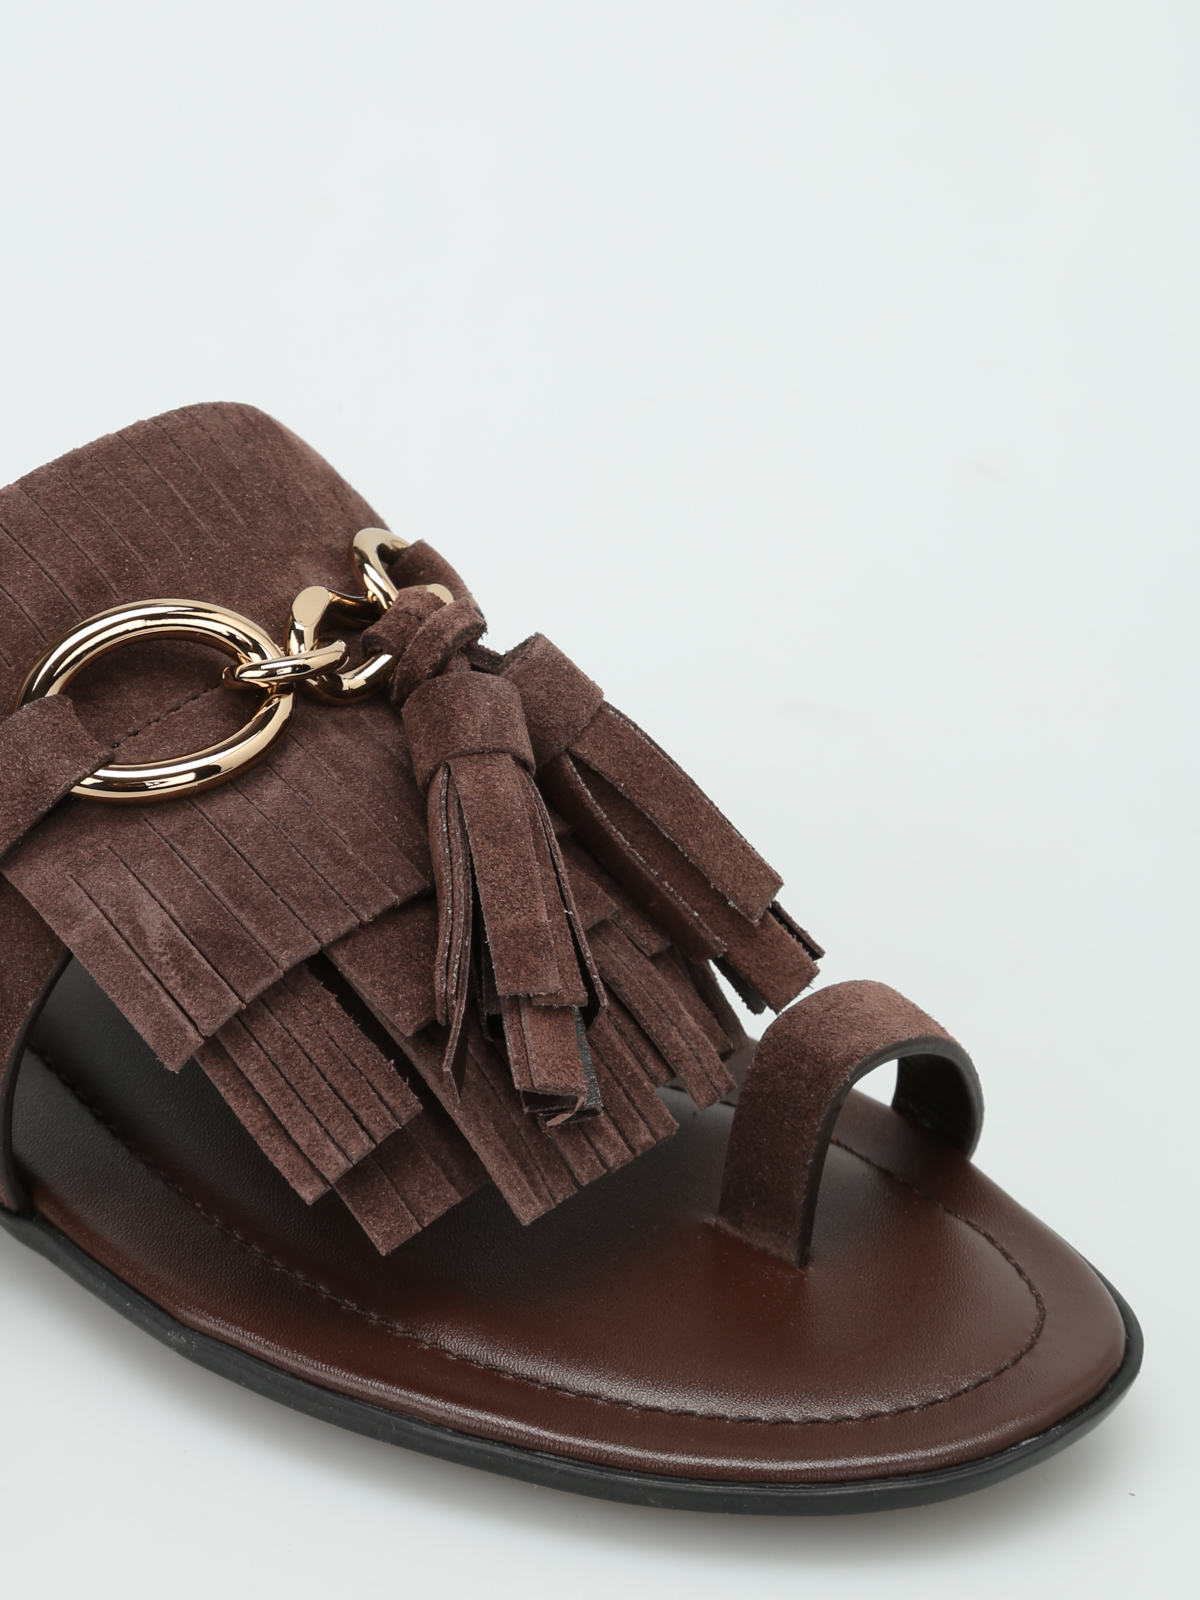 zout Huisje Toegeven Sandals Tod'S - Fringed suede flat thong sandals - XXW0OV0T580LCAS802